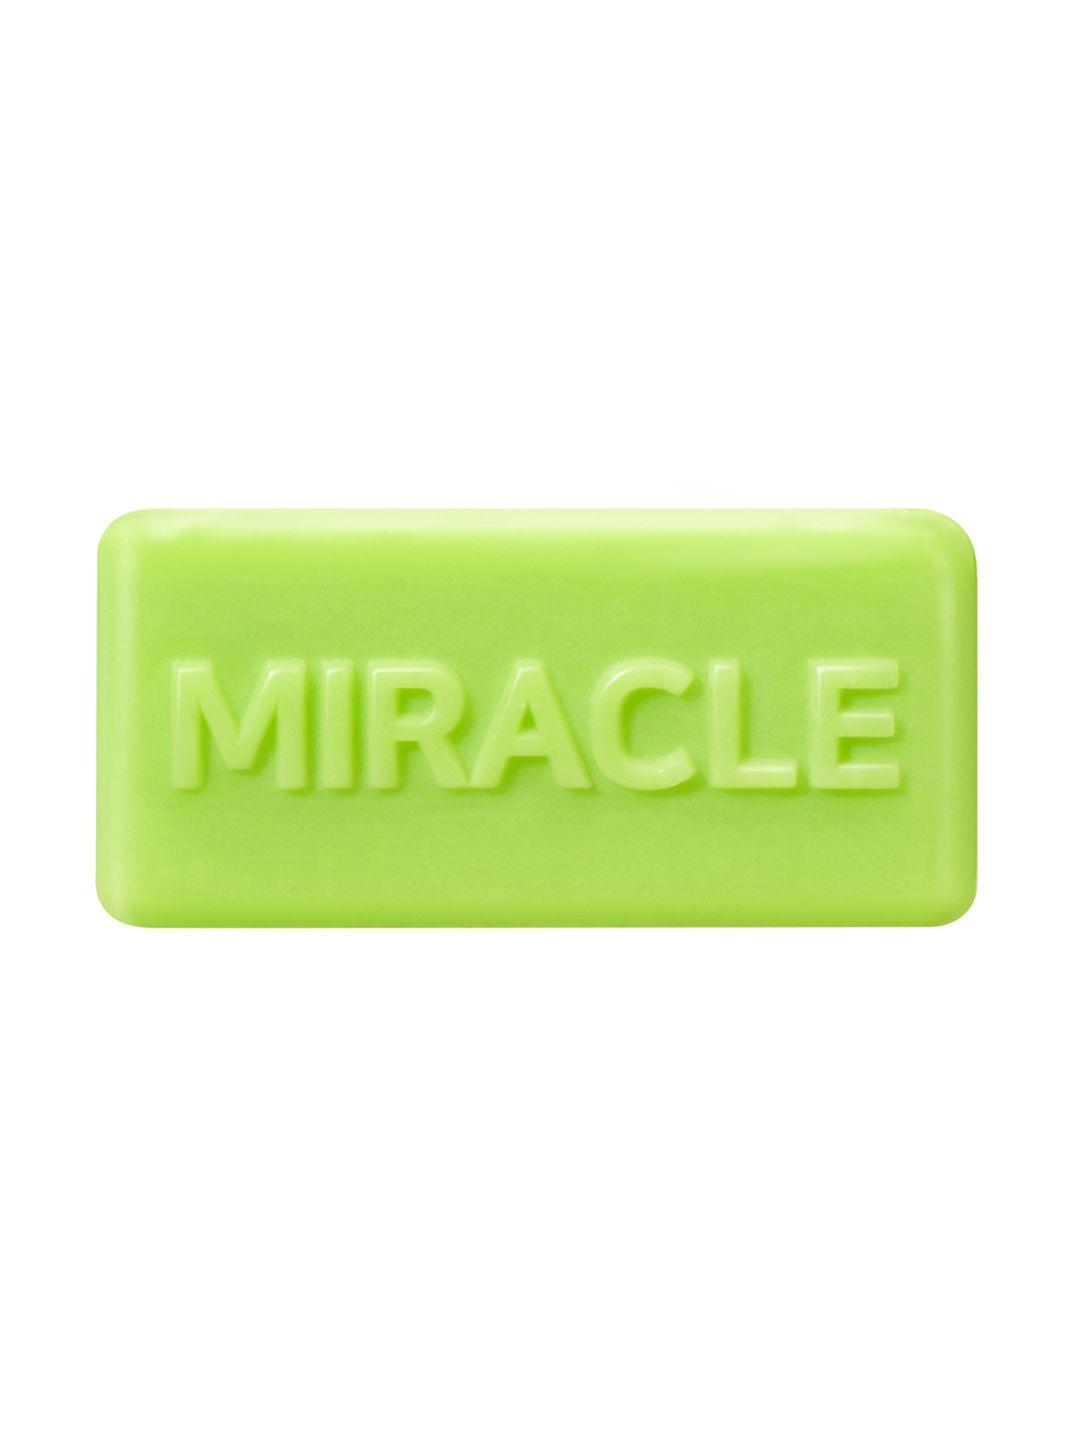 some by mi dermatologist tested aha bha pha 30 day miracle cleansing bar - 106g